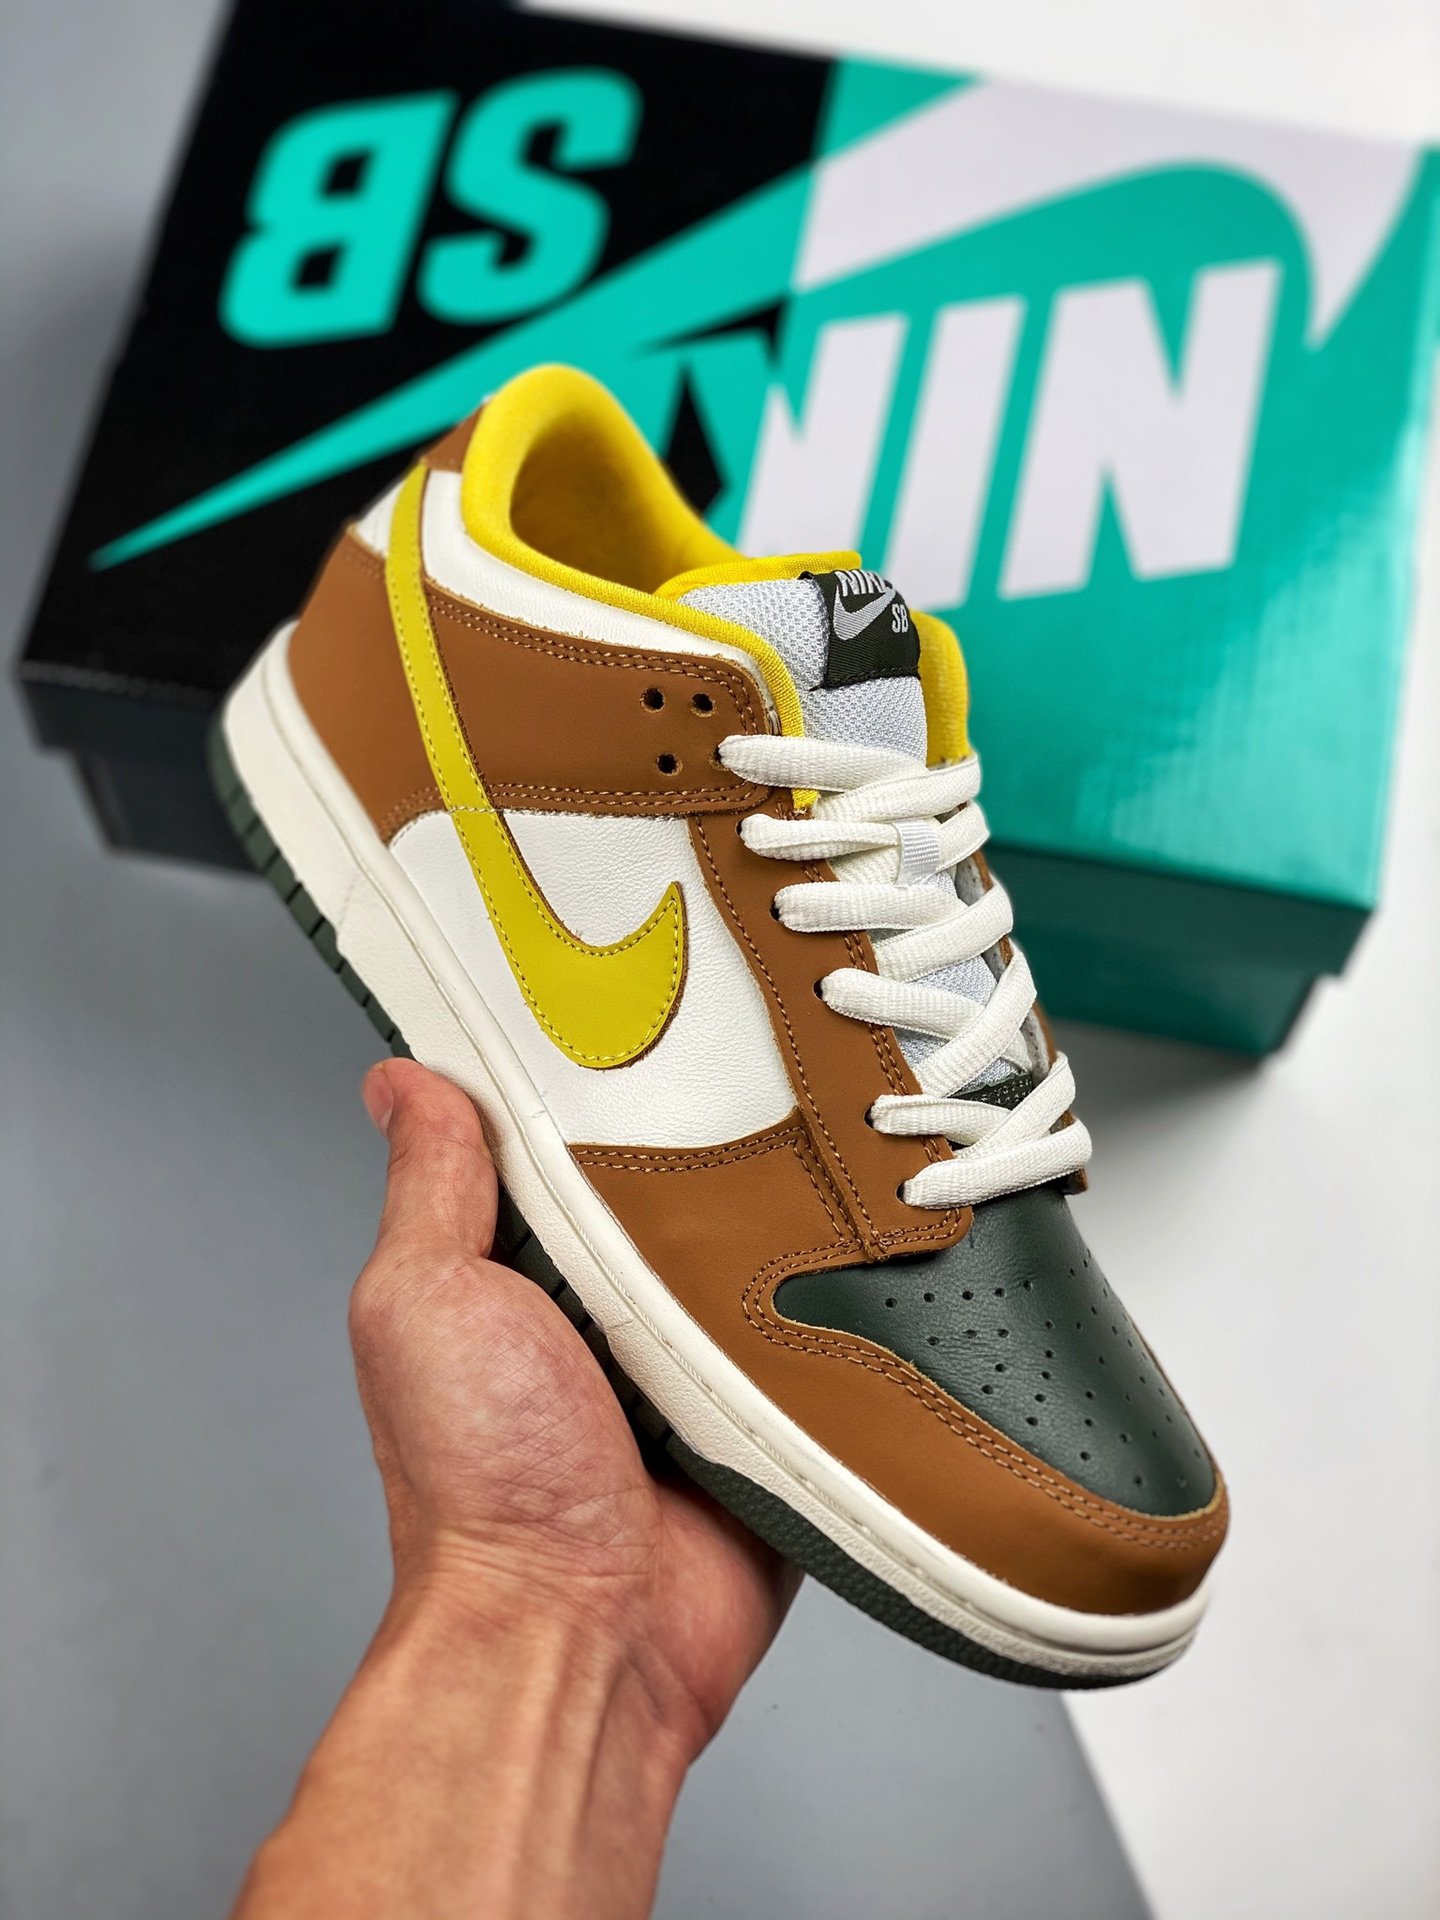 Nike SB Dunk Low Pro Vapor/Mineral Yellow Shoes